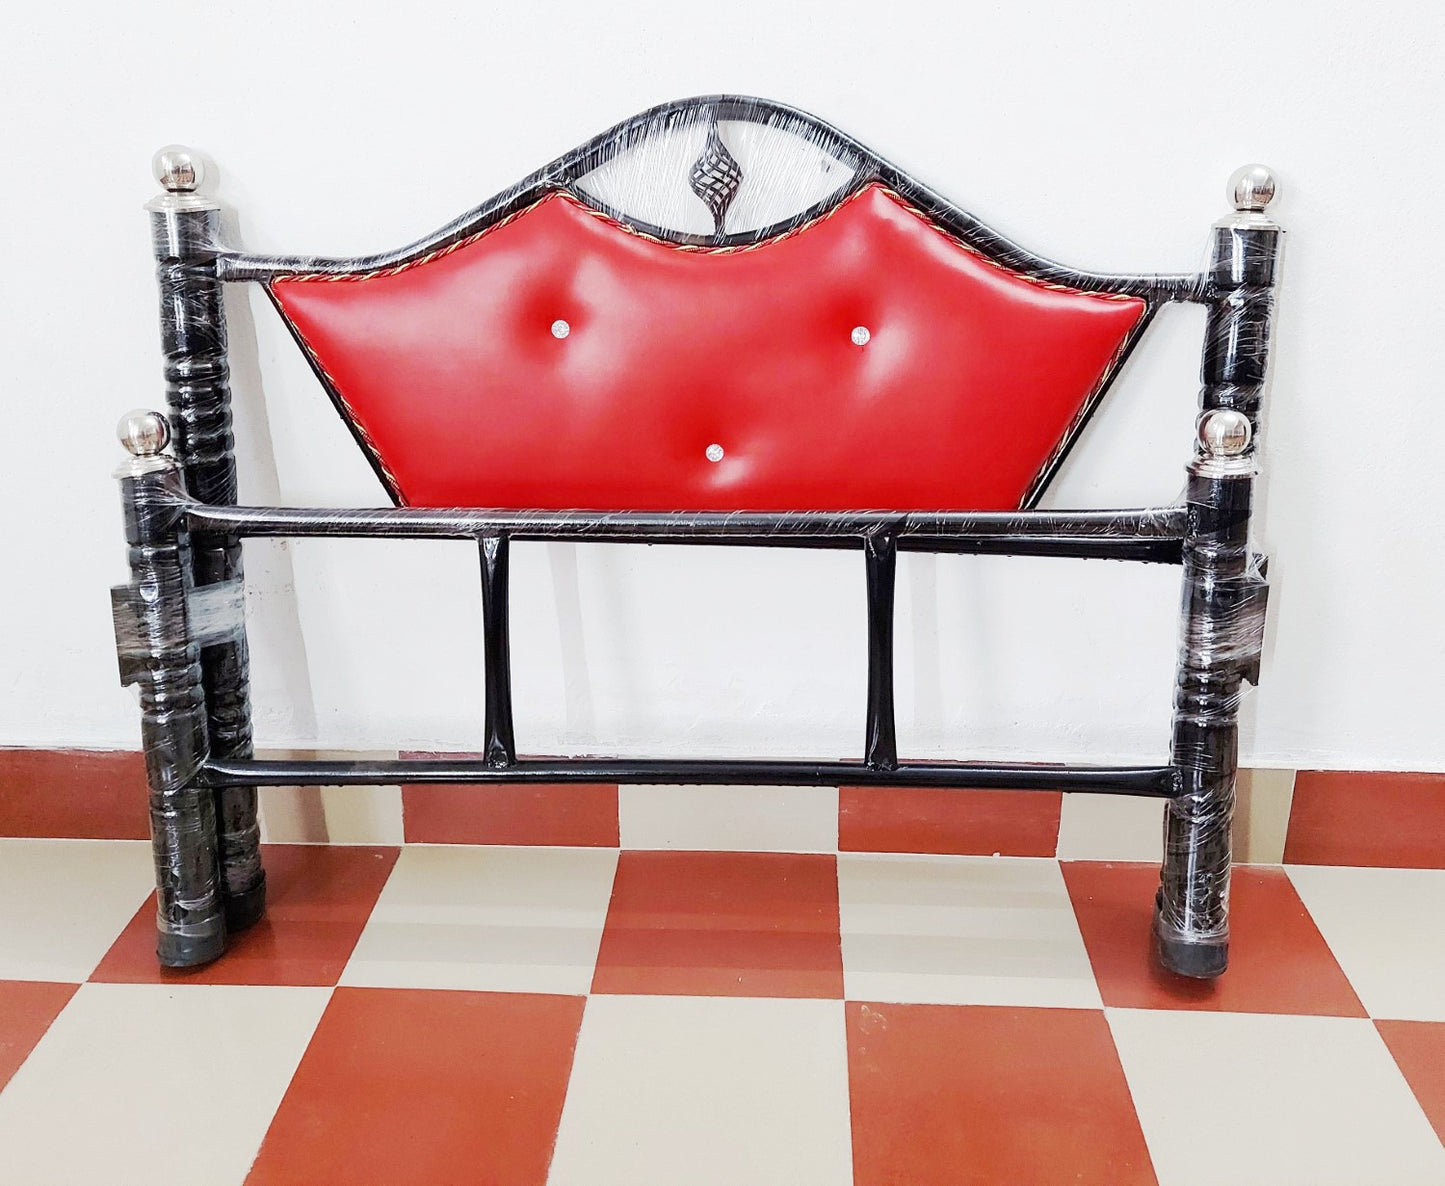 Bowzar Dhanush Model Double Bed Size 4X6.5 Feet Metal Bed Lama Red